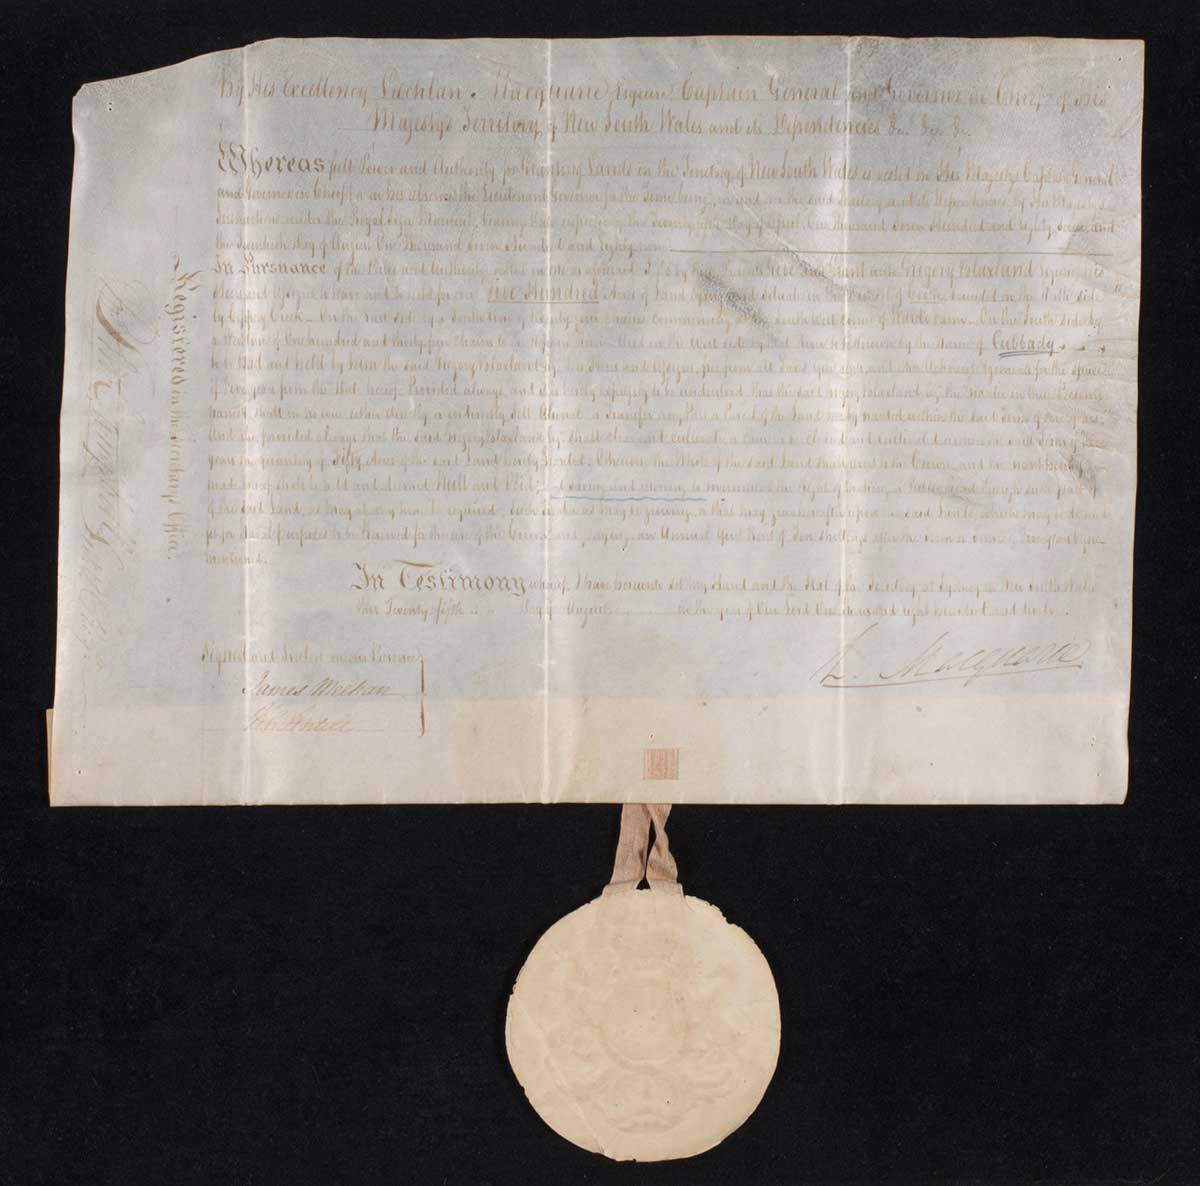 A handwritten white coloured vellum land grant made out to Gregory Blaxland that reads 'By His Exellency Lachlan Macquarie ...'. The document is dated 25th August 1812. The round shaped seal hangs freely from the bottom, attached by a beige coloured ribbon.